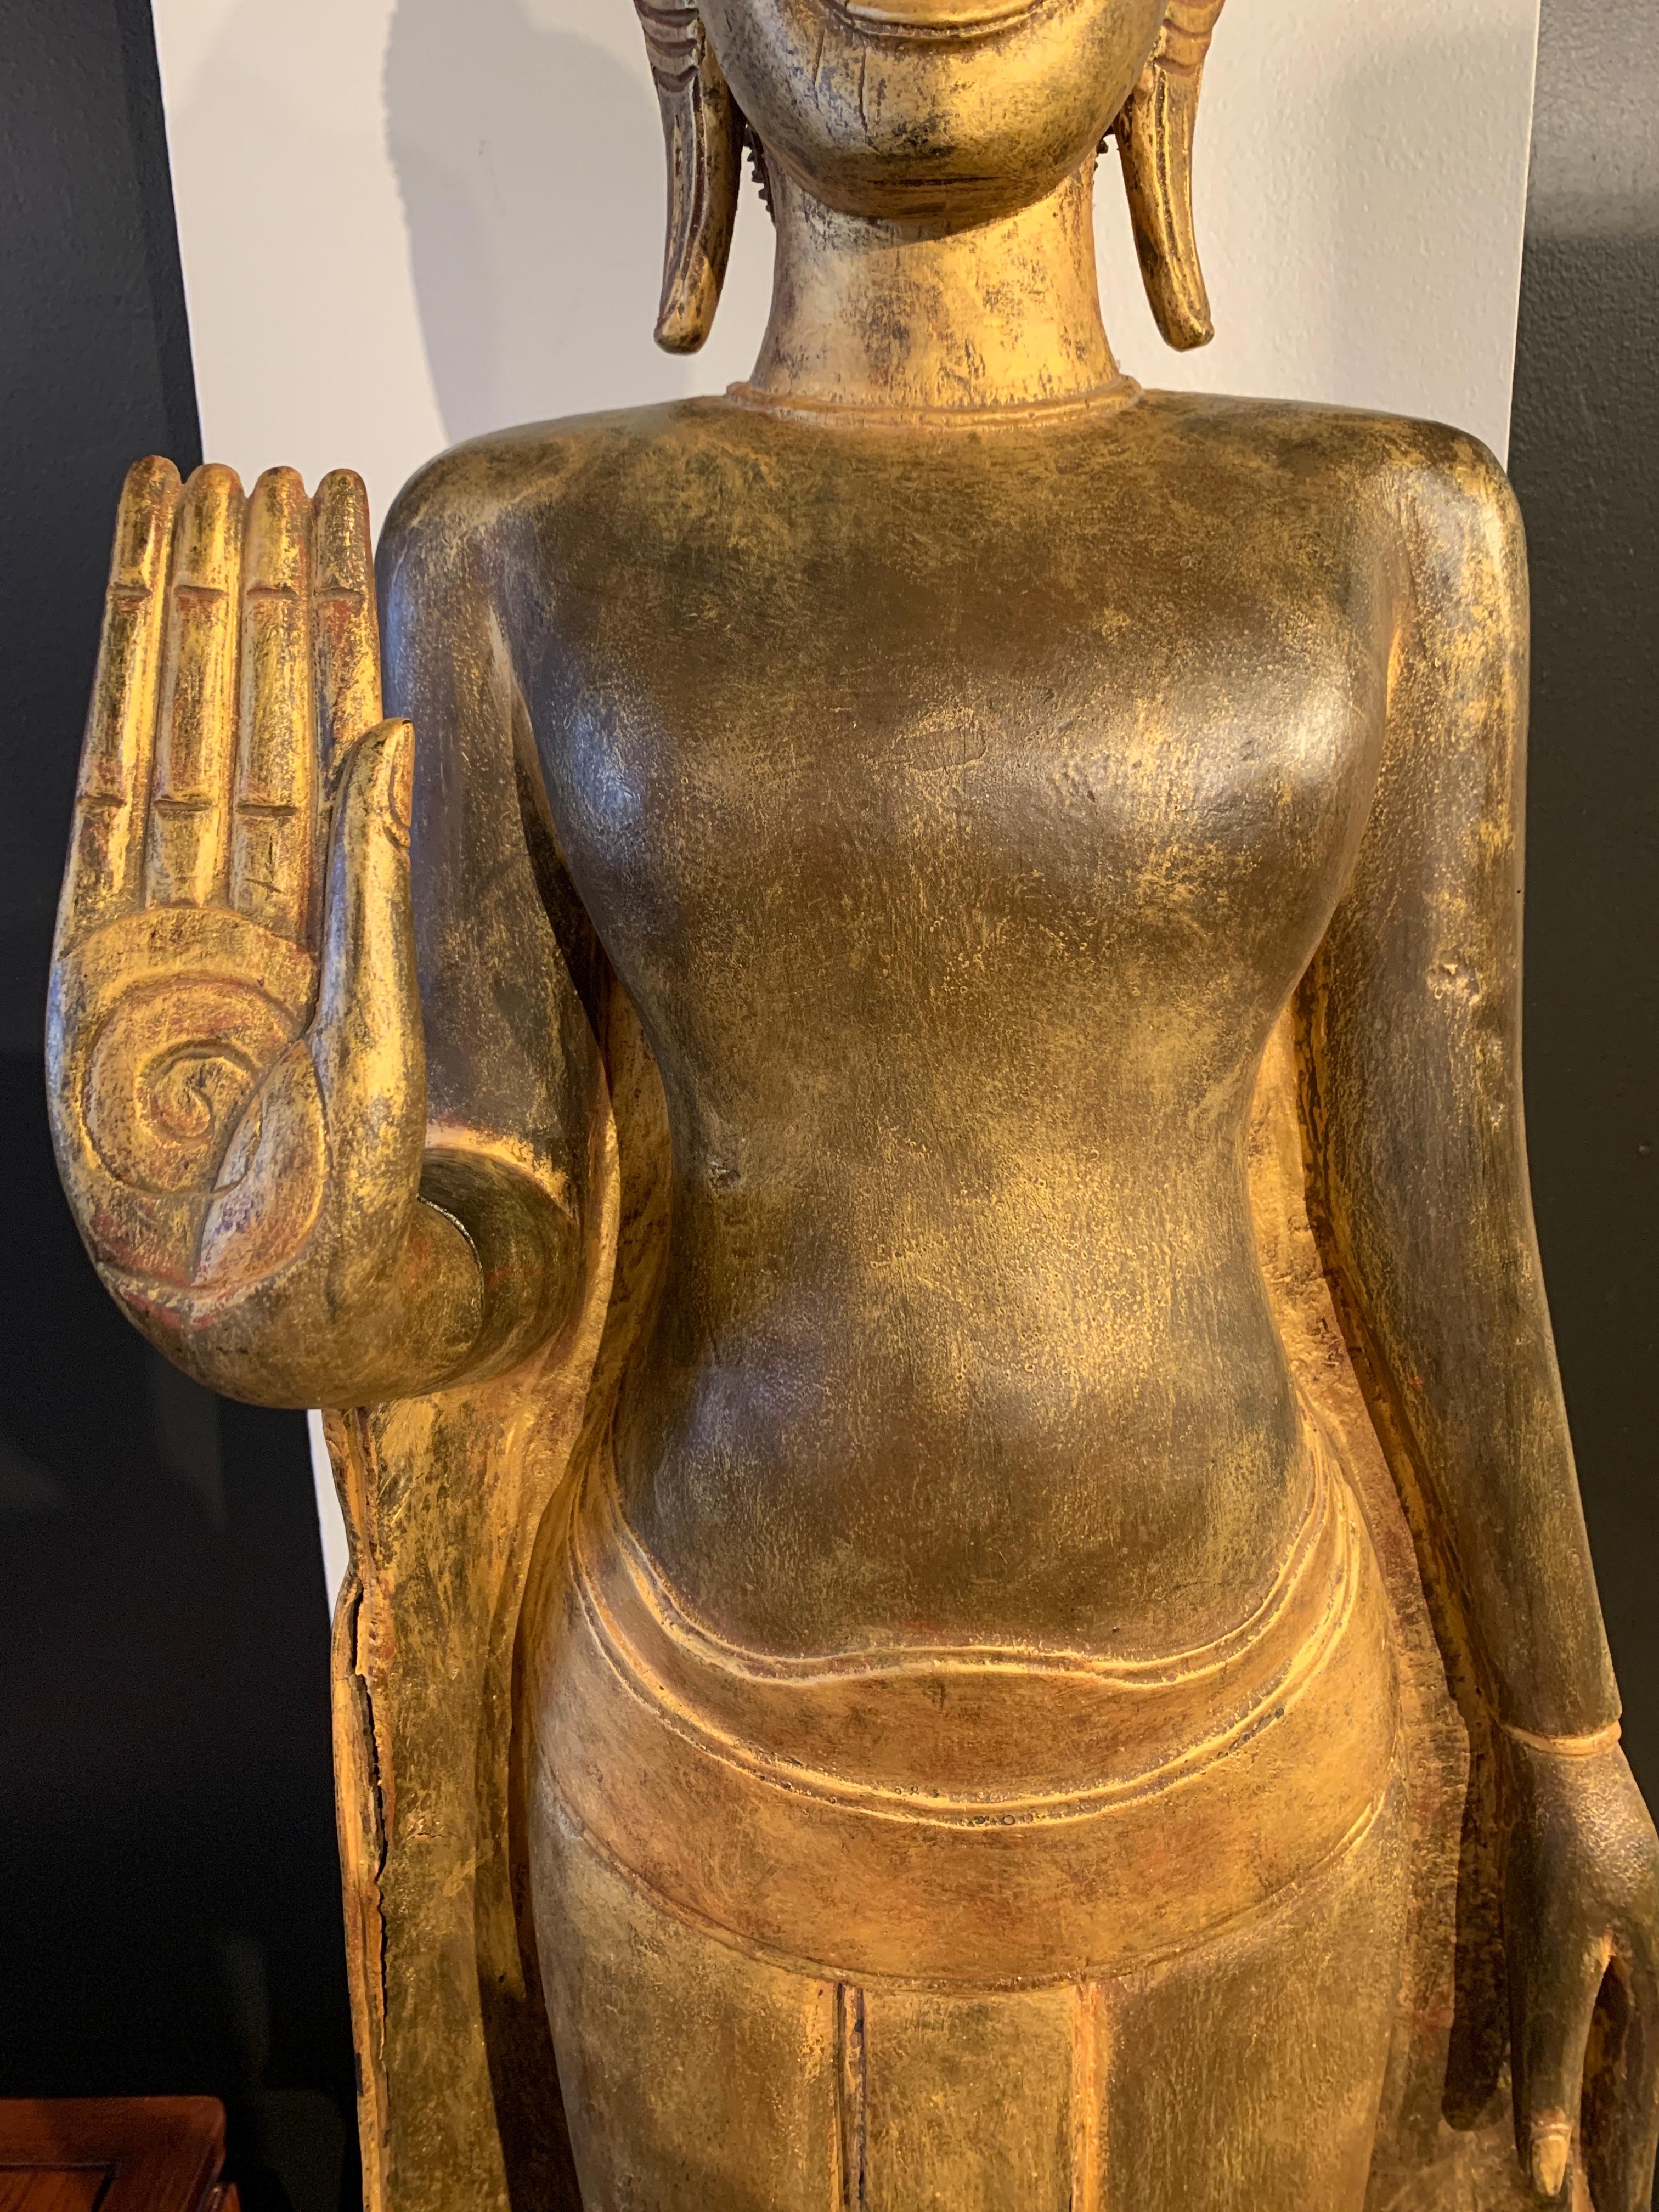 Large Carved Gilt Teak Standing Buddha, Northern Thailand, Early 20th Century For Sale 4